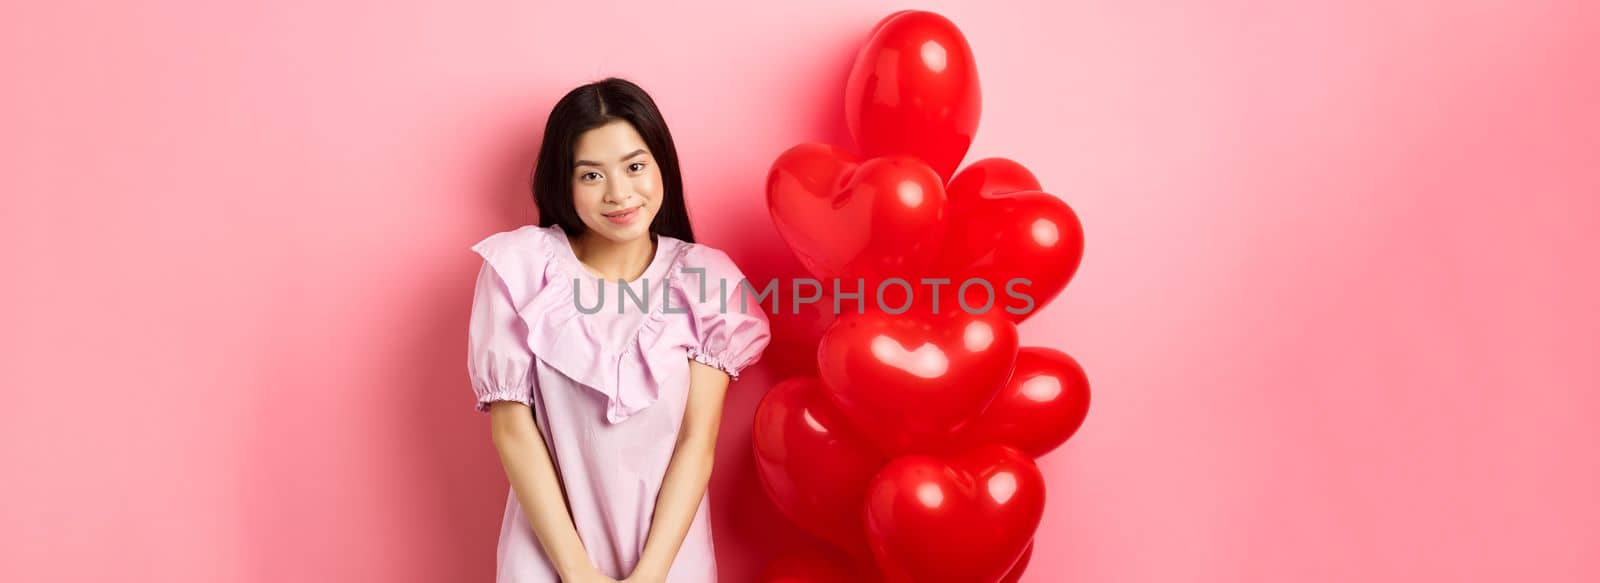 Cute asian girl in dress looking shy and smiling, standing modest near valentines day balloons, blushing on romantic date, looking at camera, pink background by Benzoix